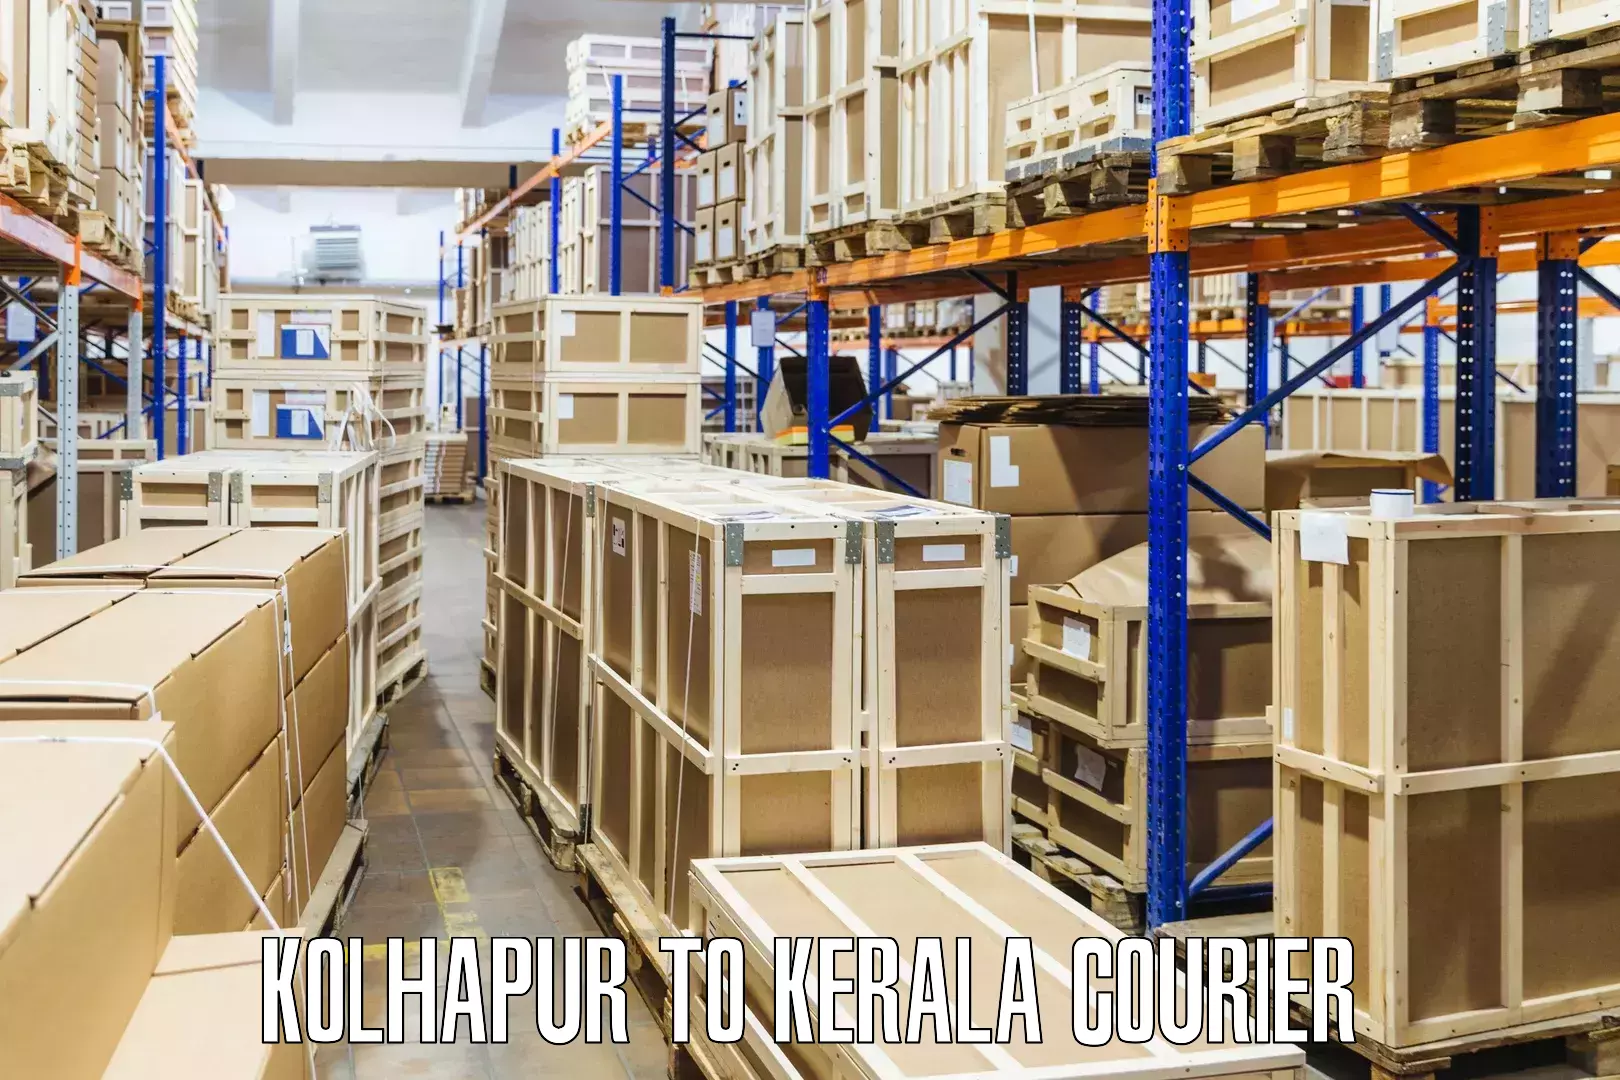 Flexible delivery schedules Kolhapur to Kerala